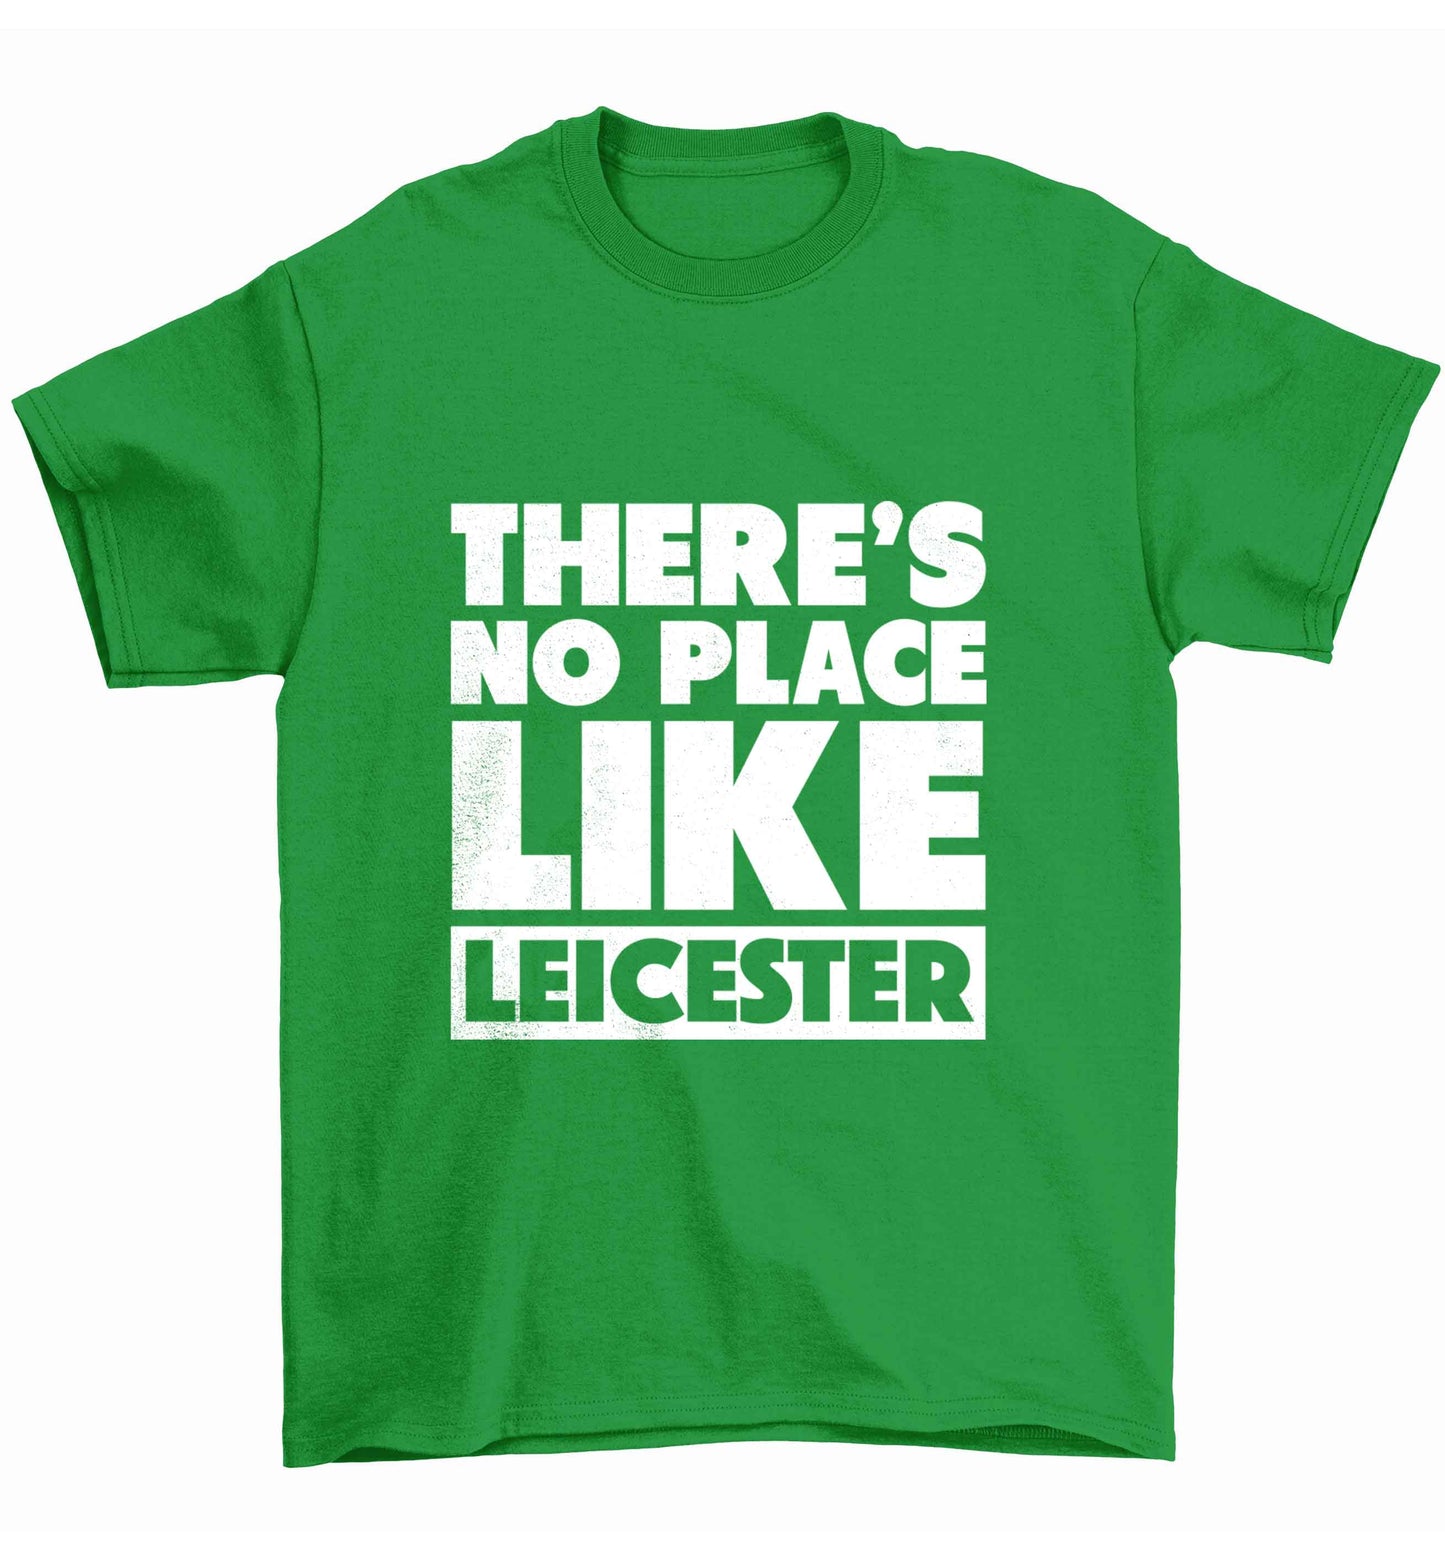 There's no place like Leicester Children's green Tshirt 12-13 Years